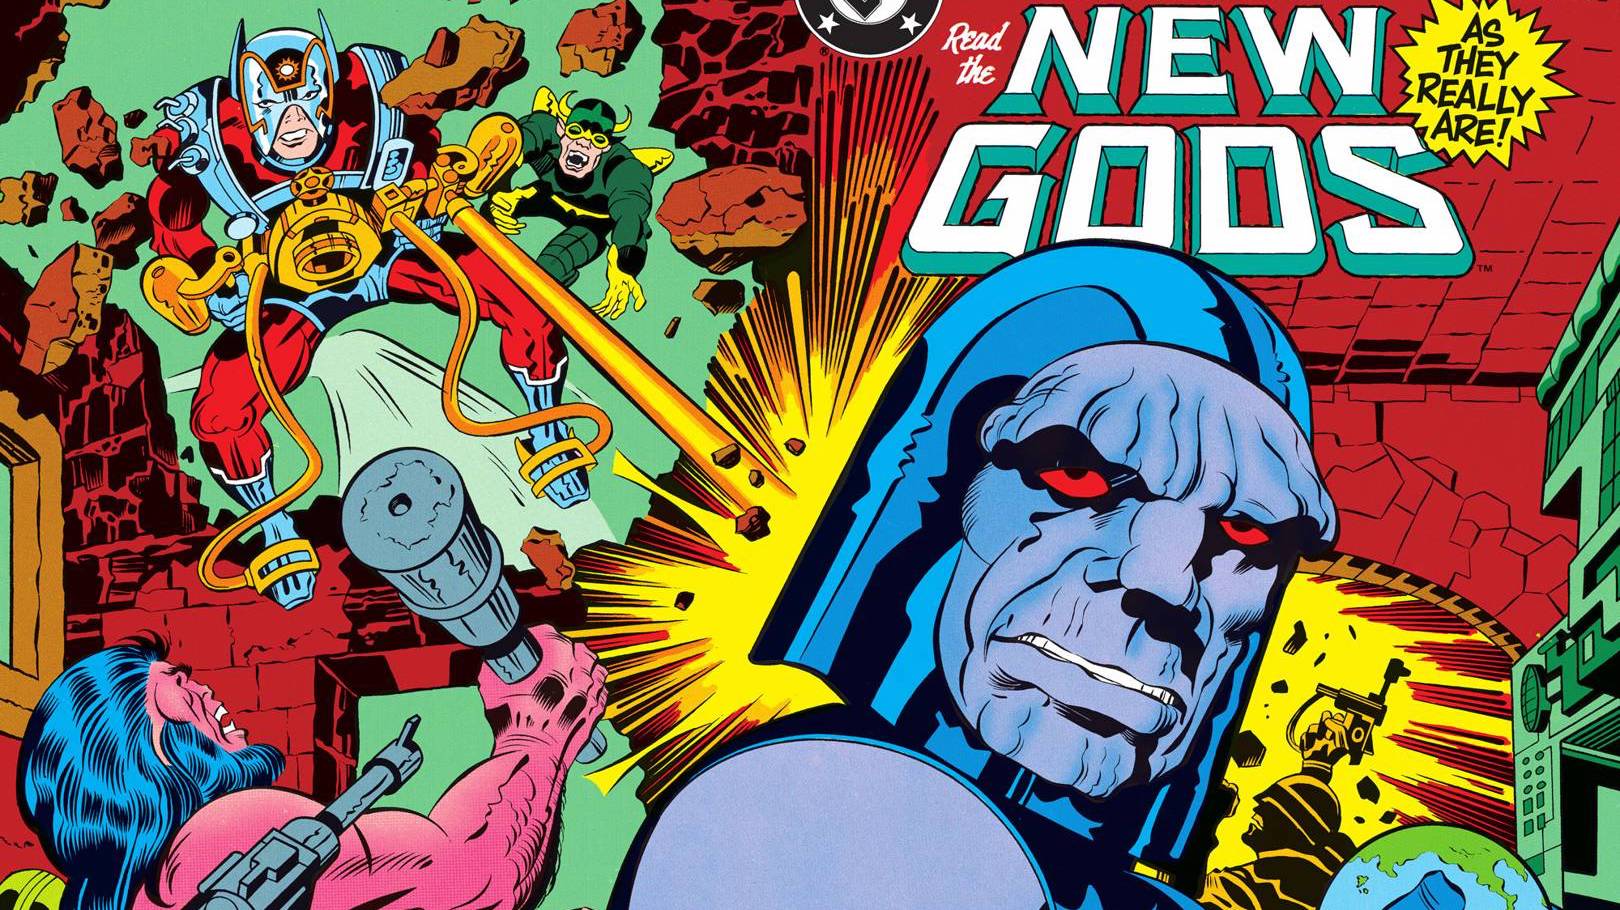 History of the New Gods